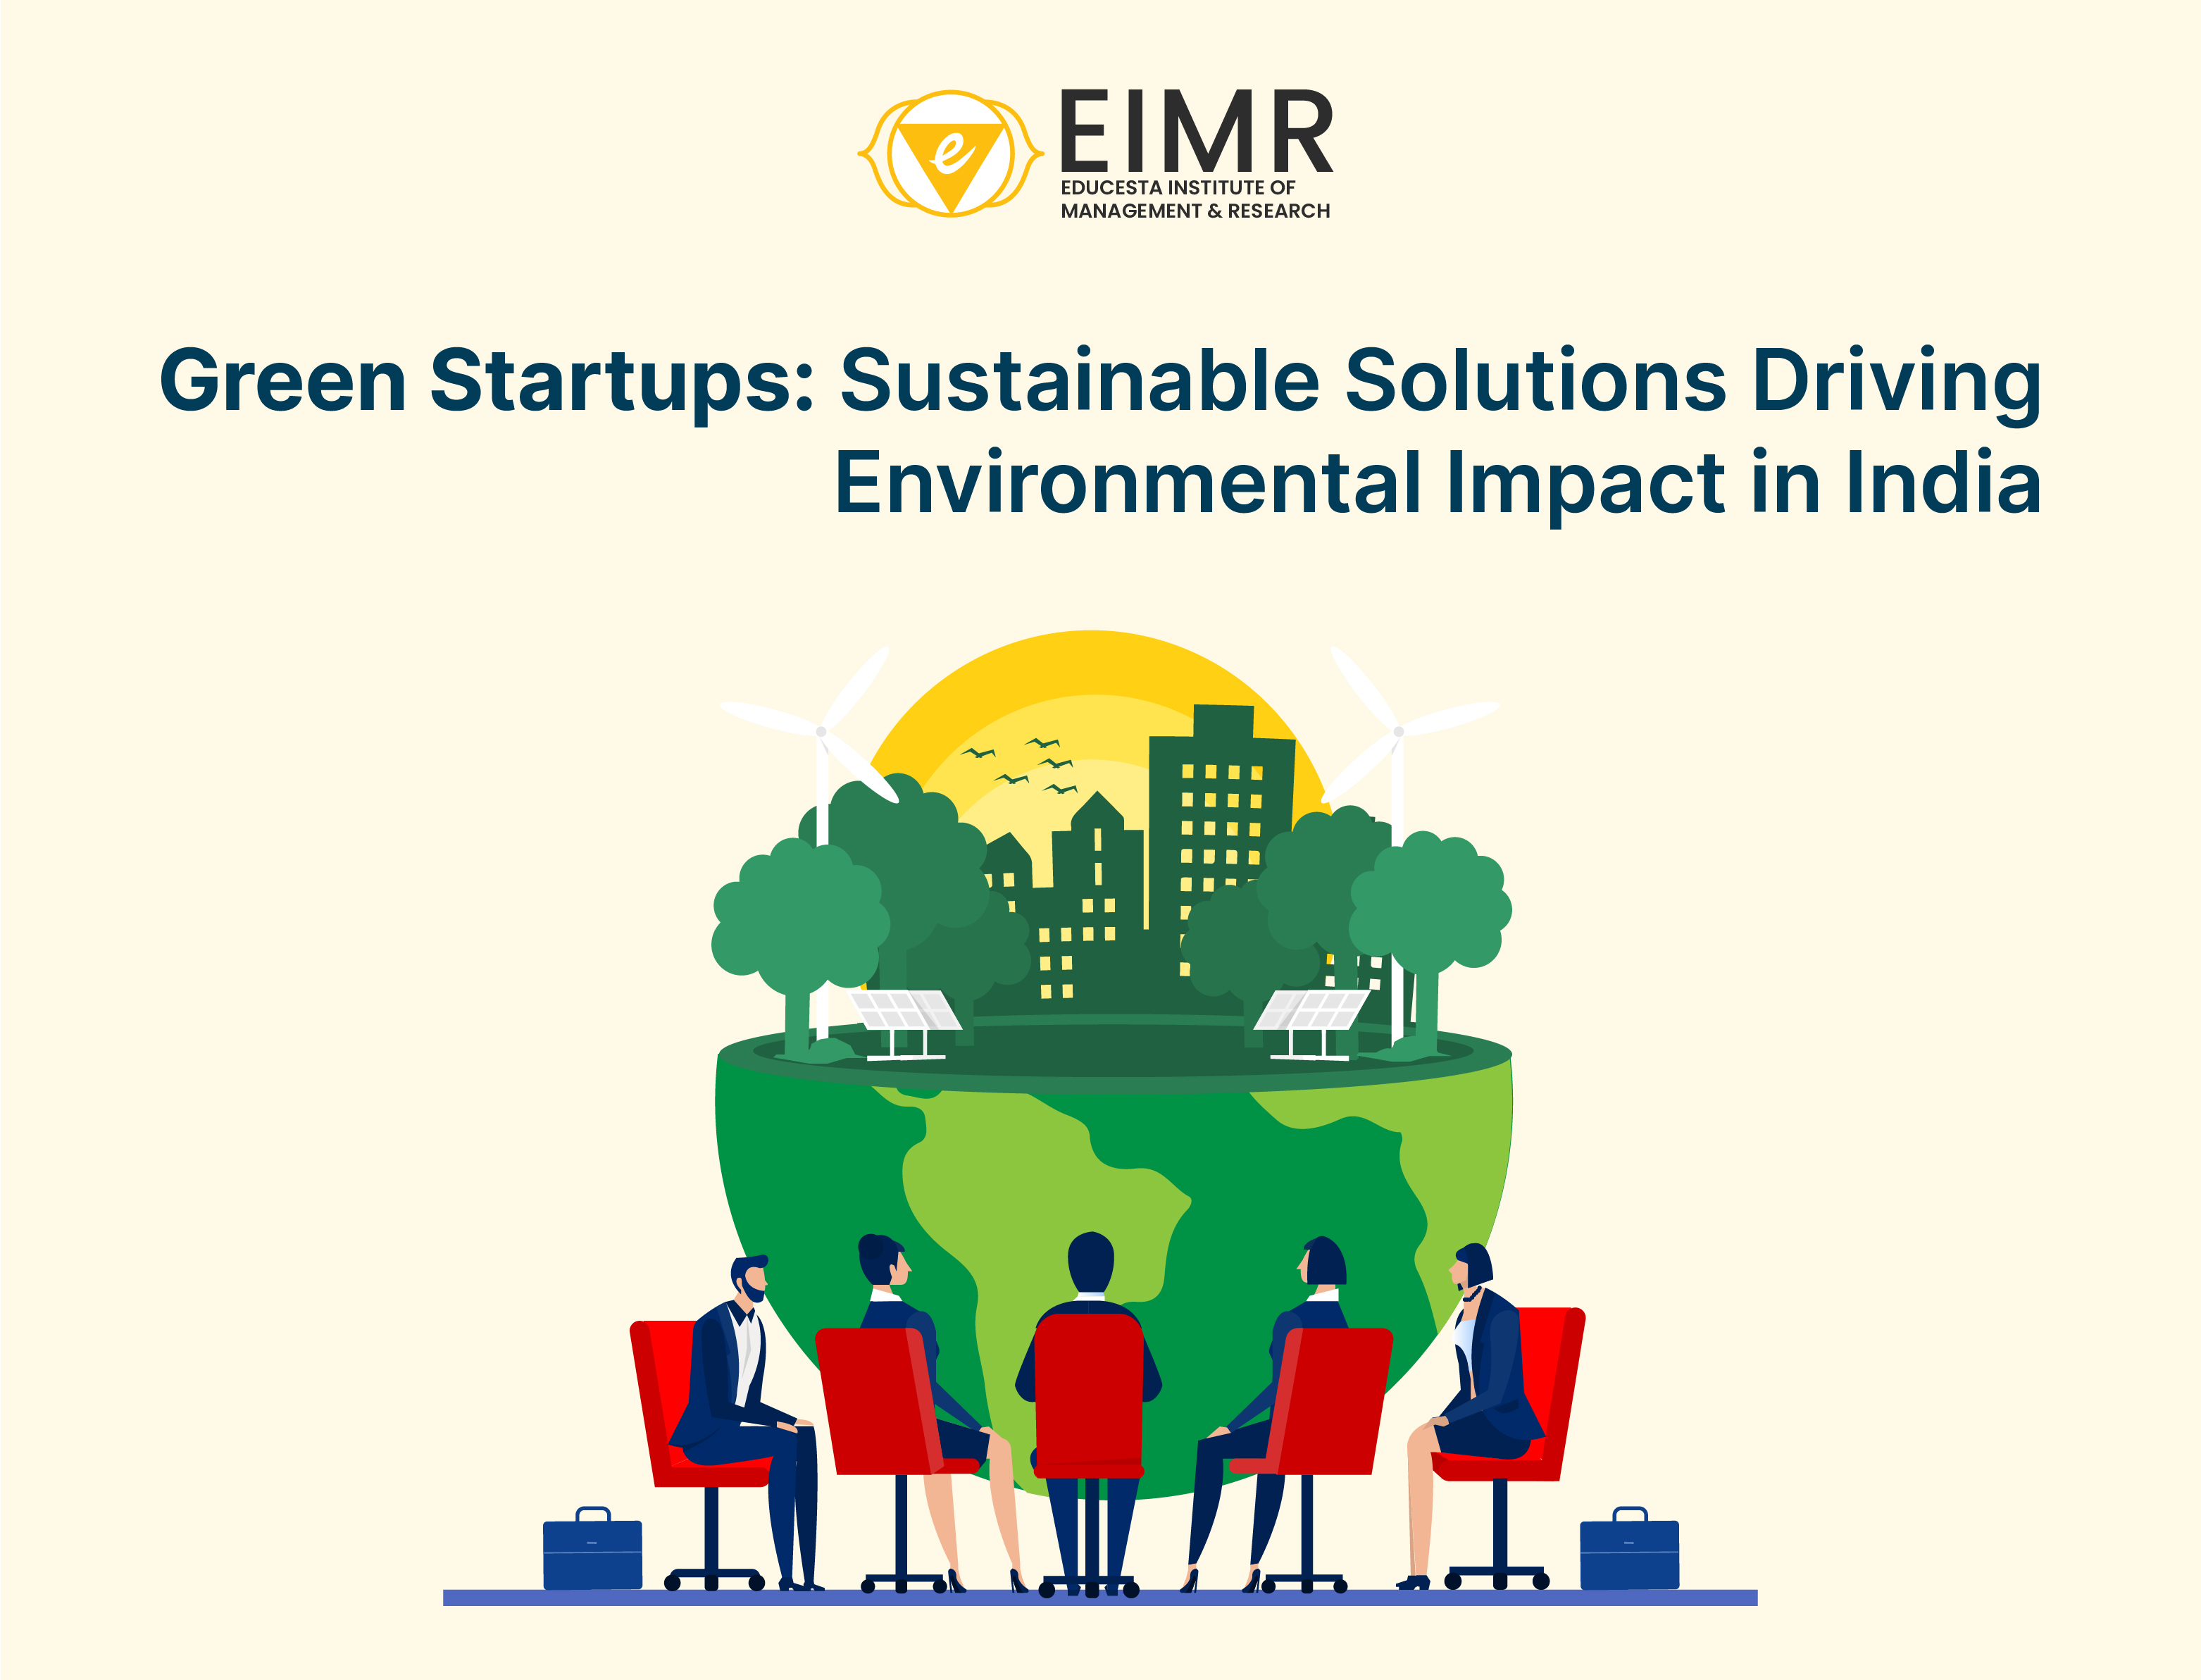 Green Startups in India